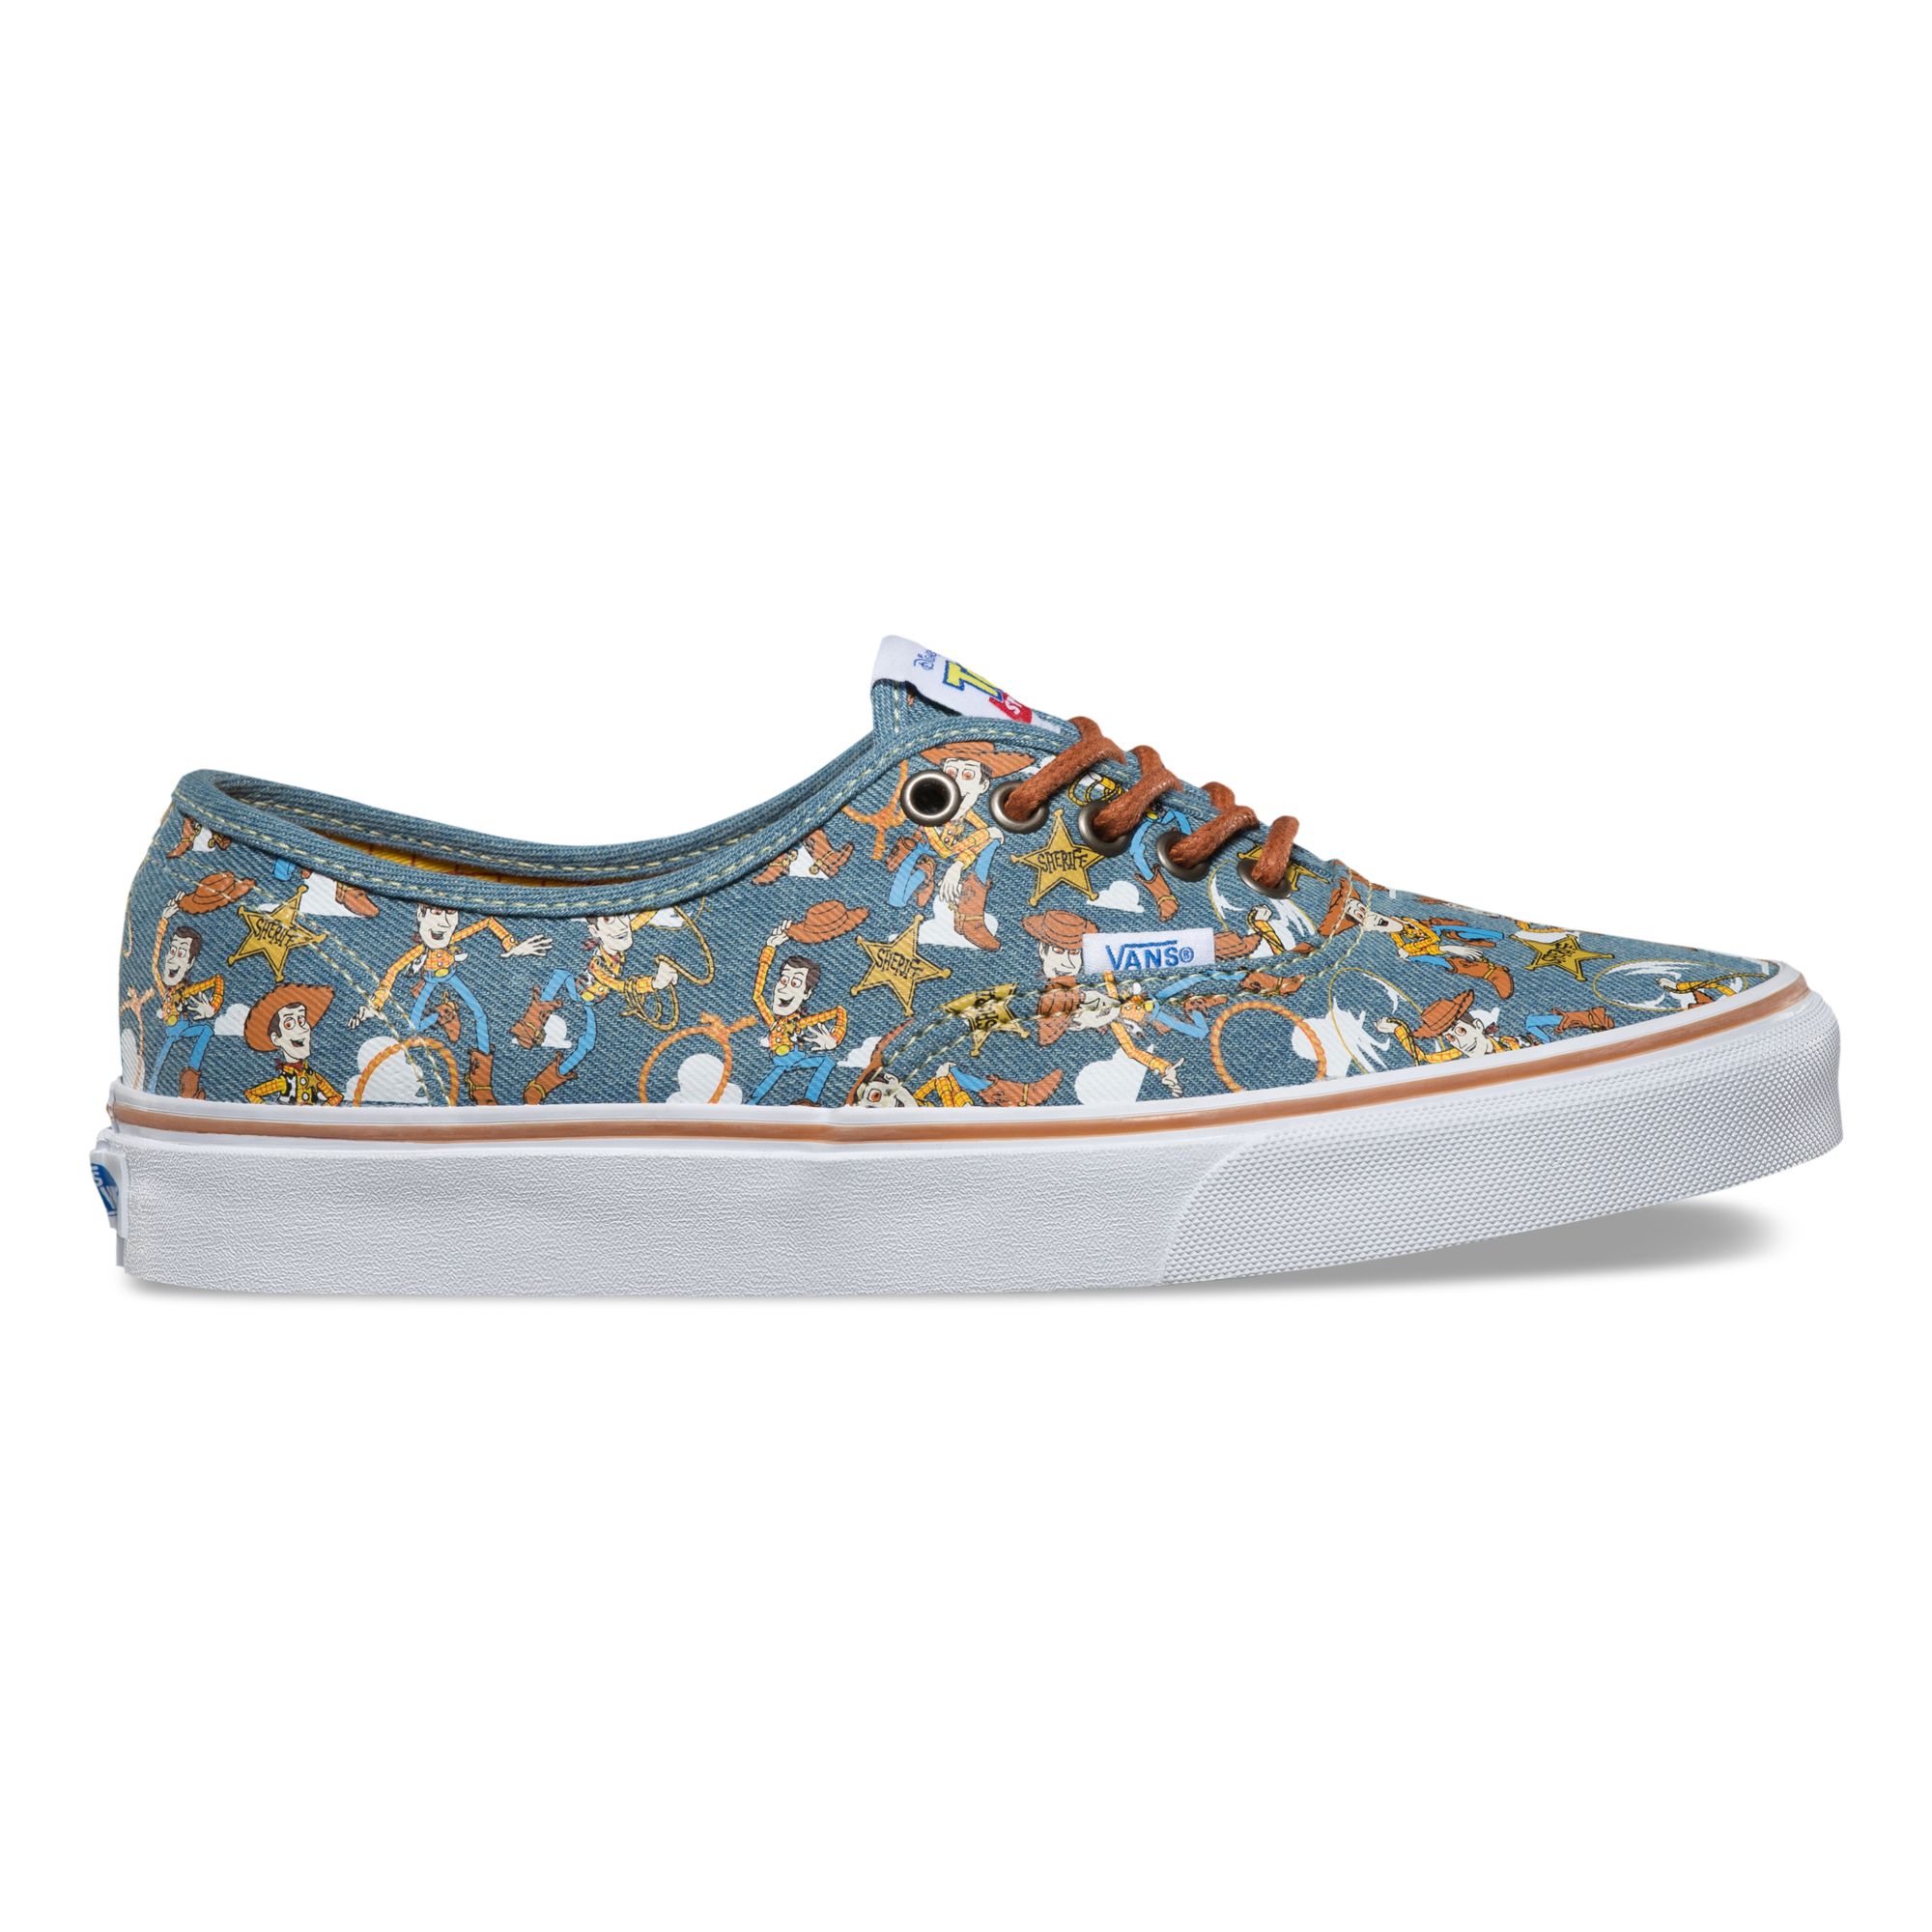 Vans Toy Story Authentic